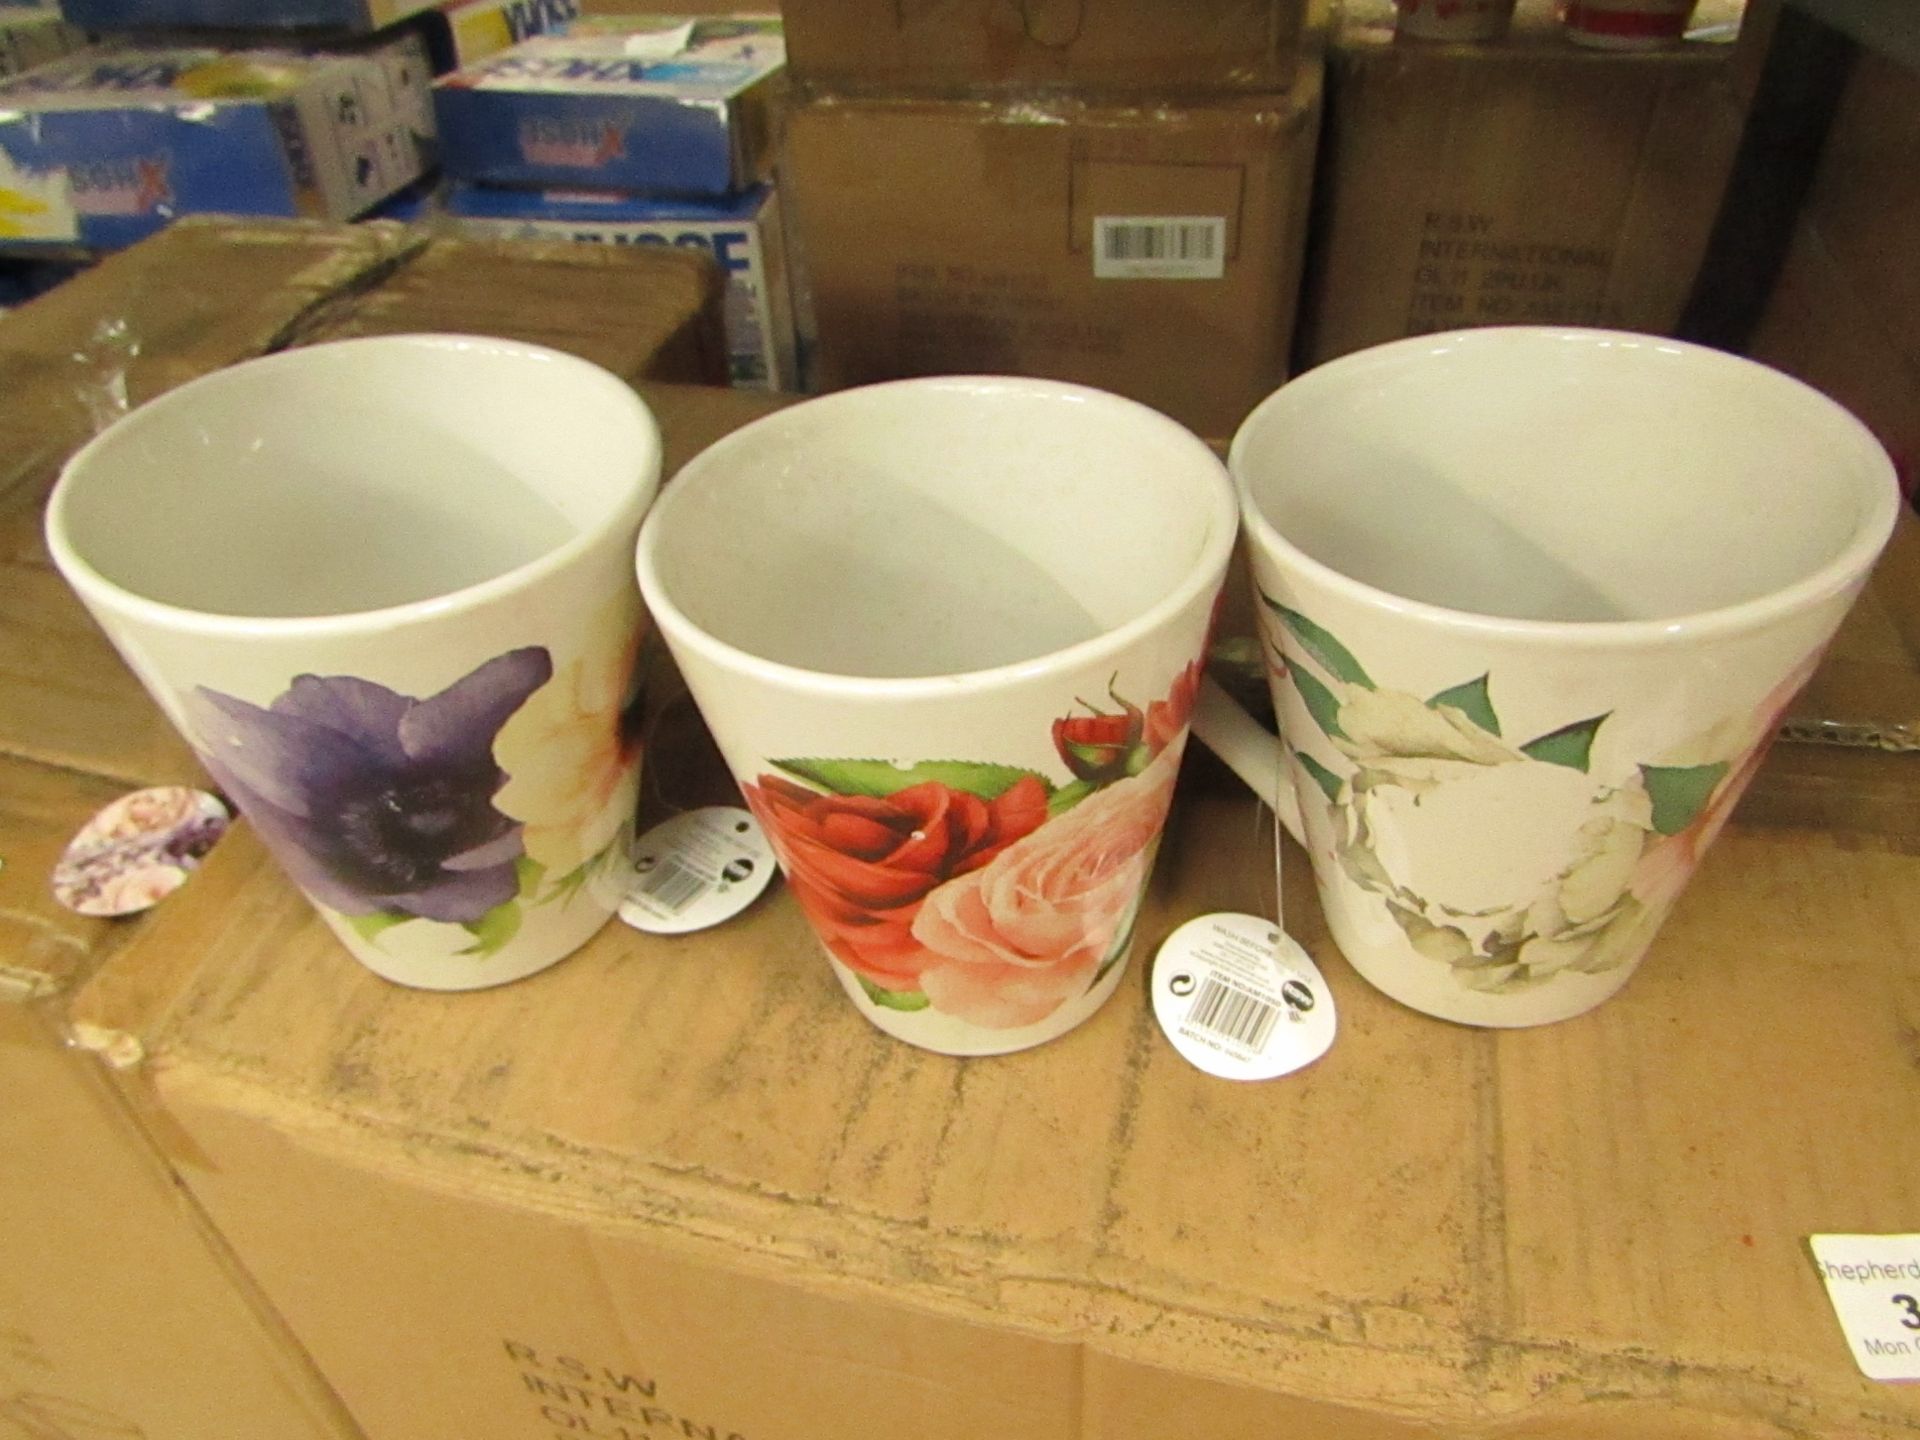 Box of 36 Mugs. New with tags. See image